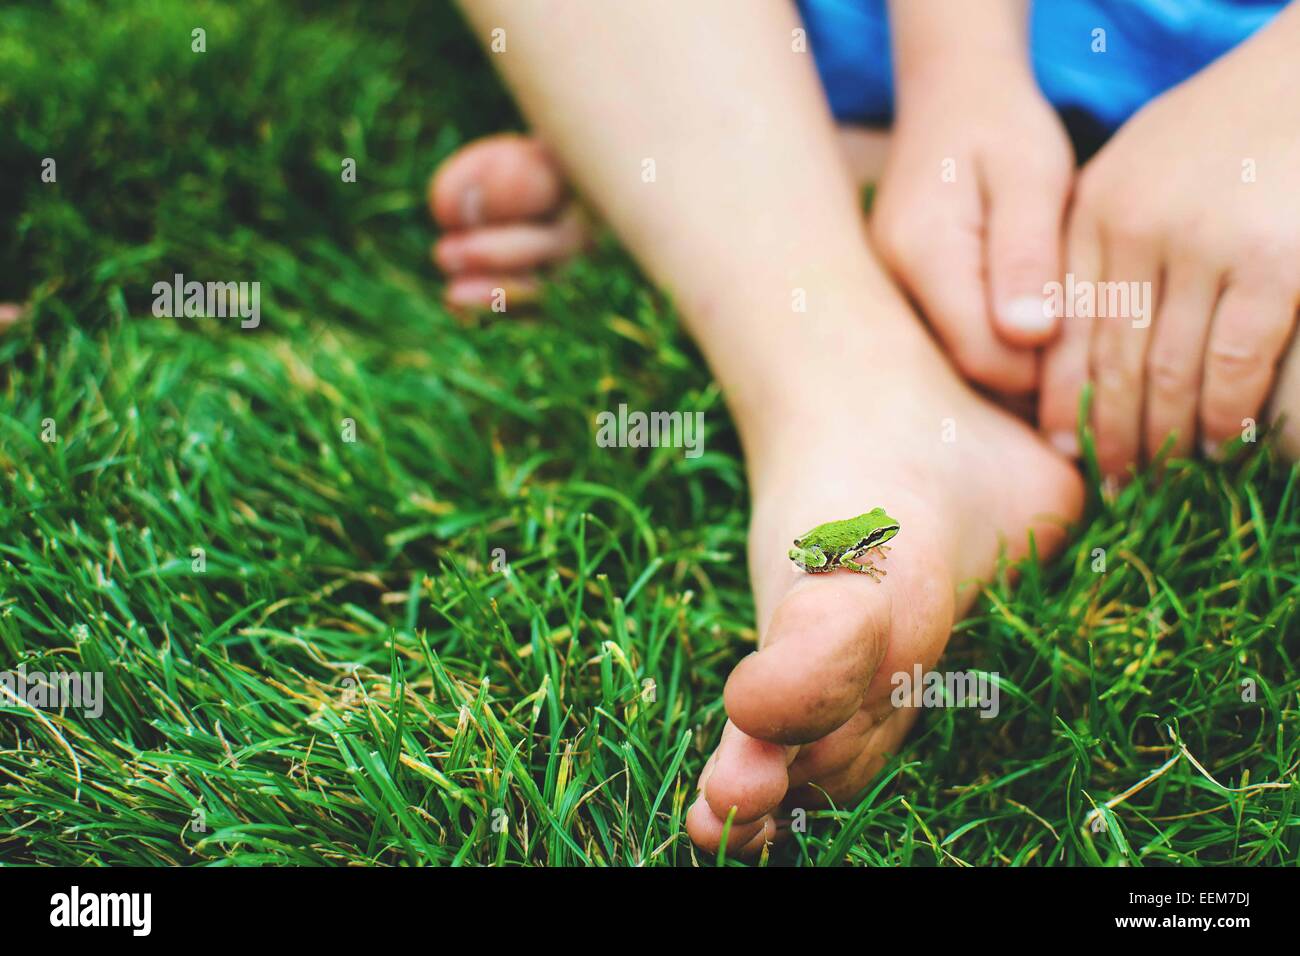 Close-up of a miniature frog on a boy's foot Stock Photo